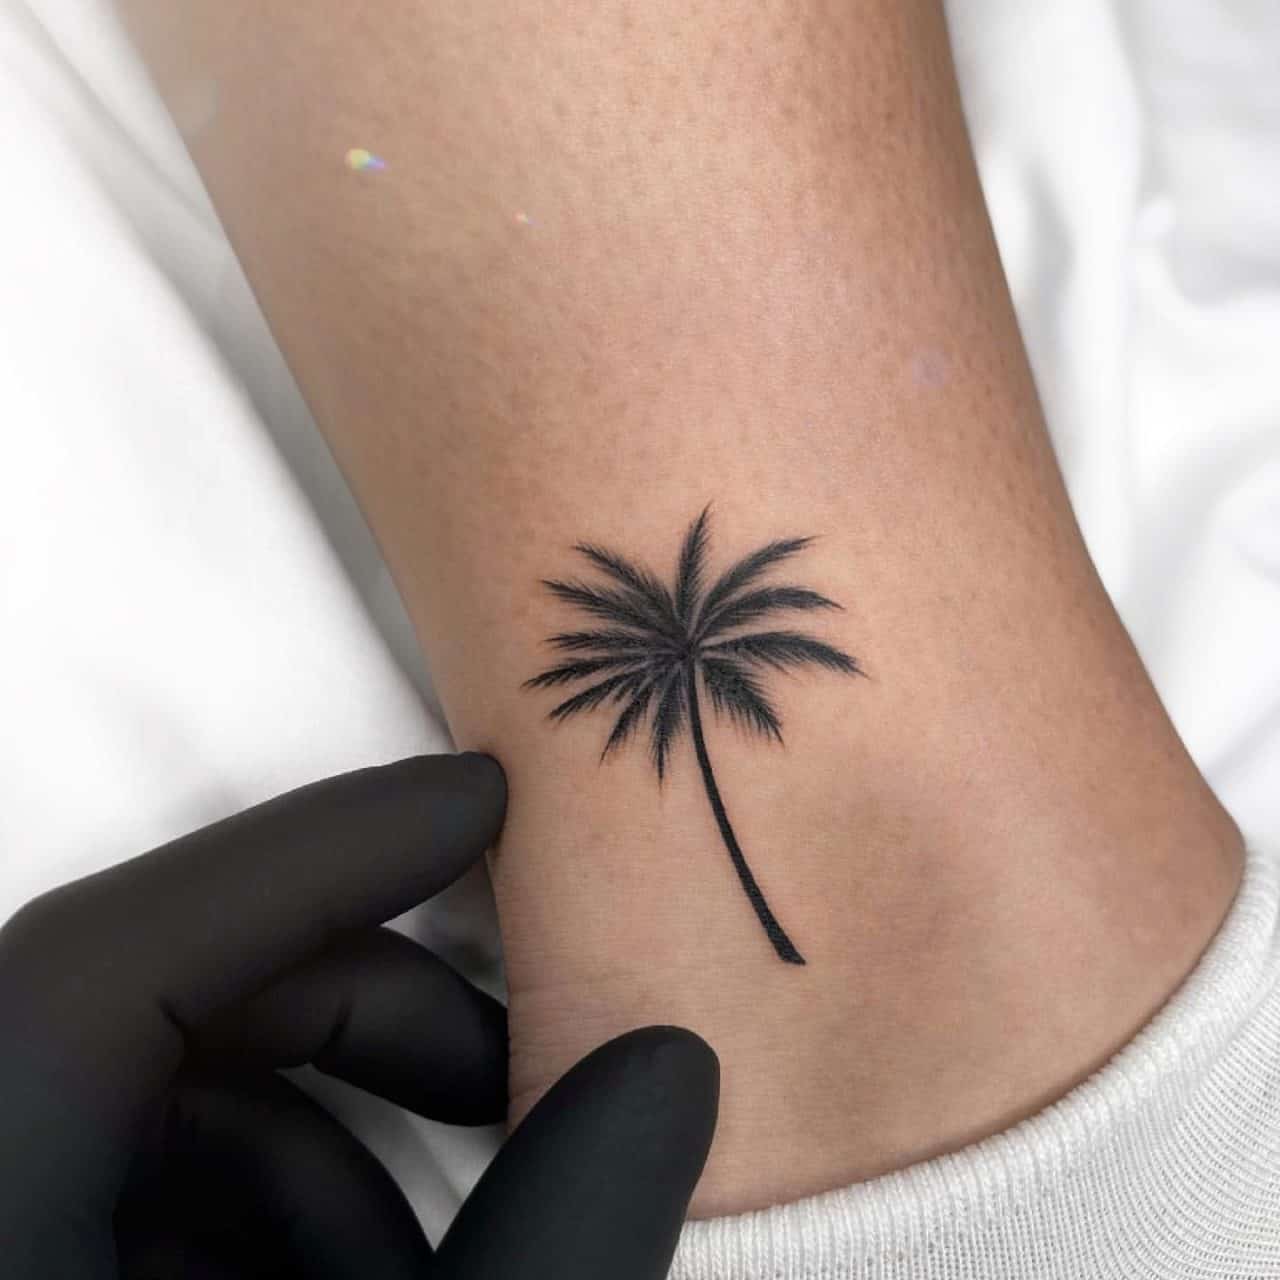 30 Awesome Palm Tree Tattoo Ideas for Men & Women in 2022